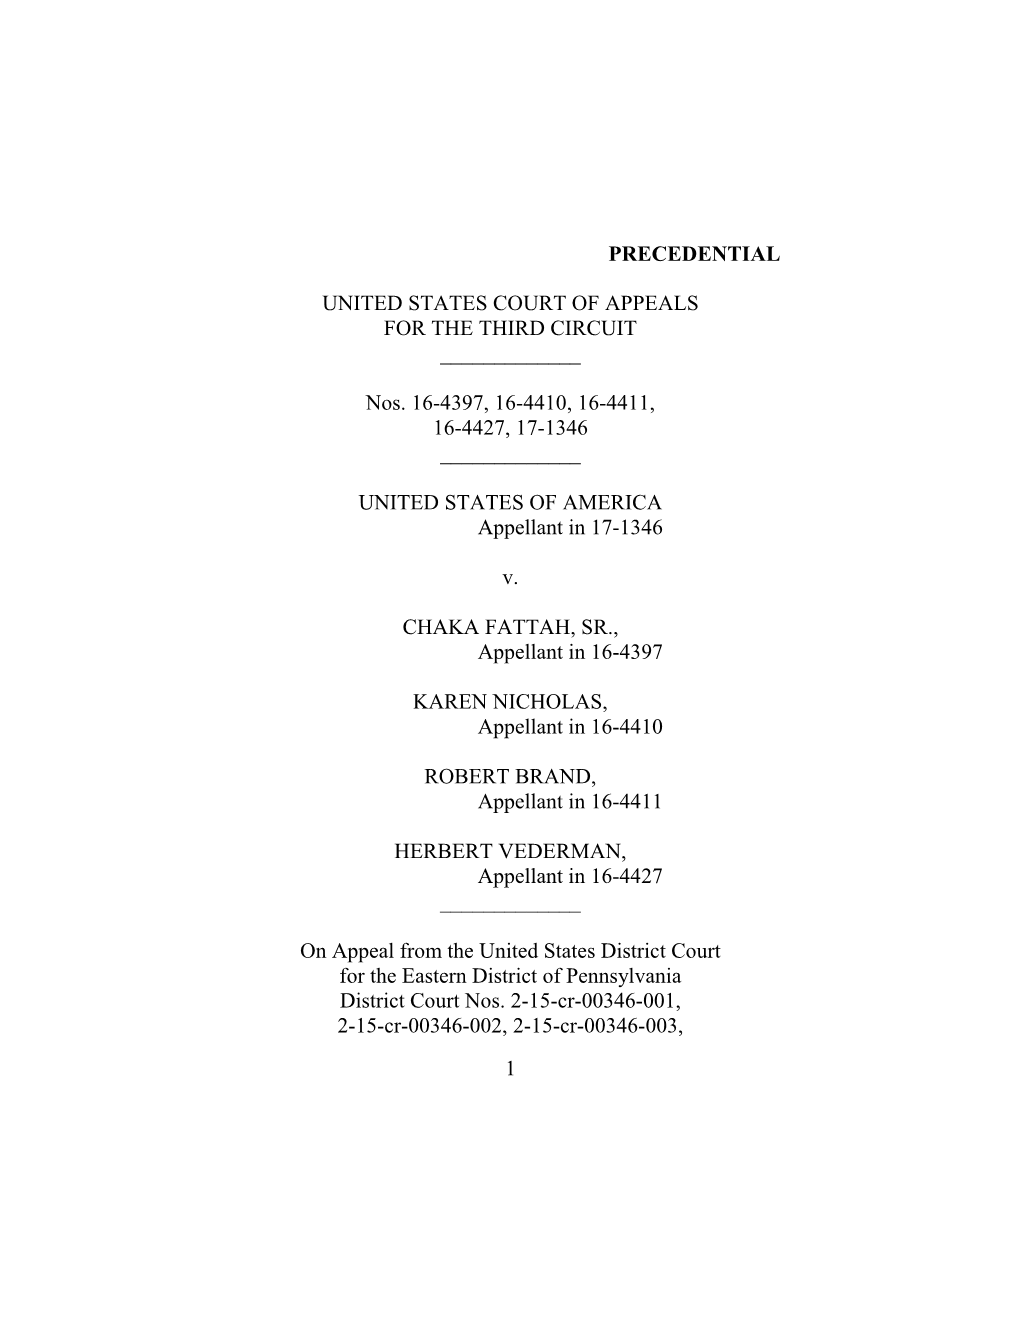 1 Precedential United States Court of Appeals for The